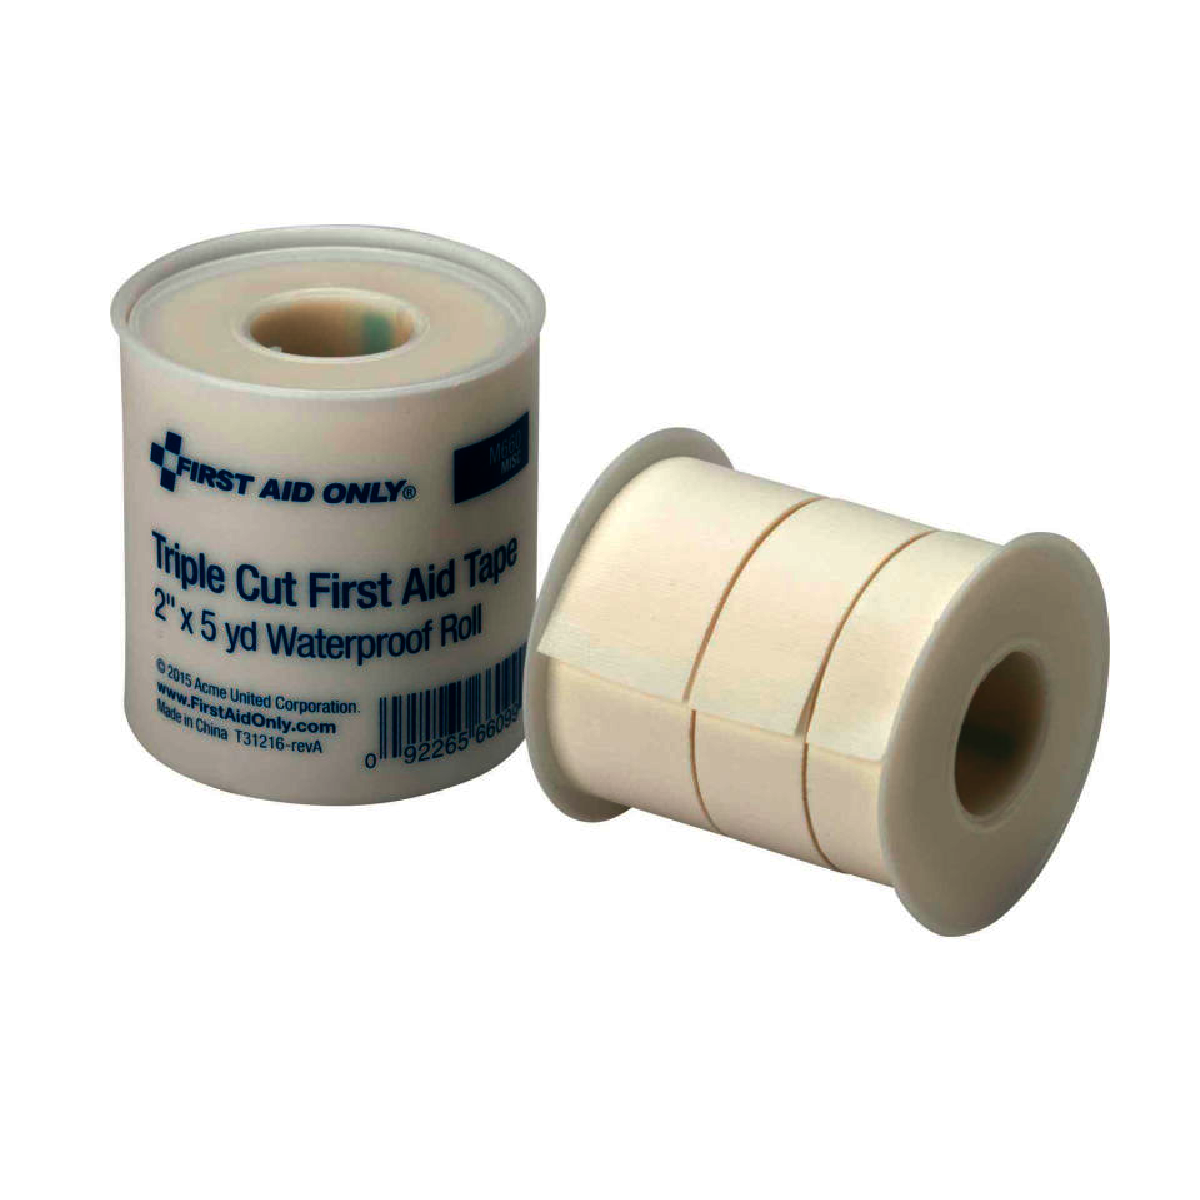 United First Aid: Paper Products